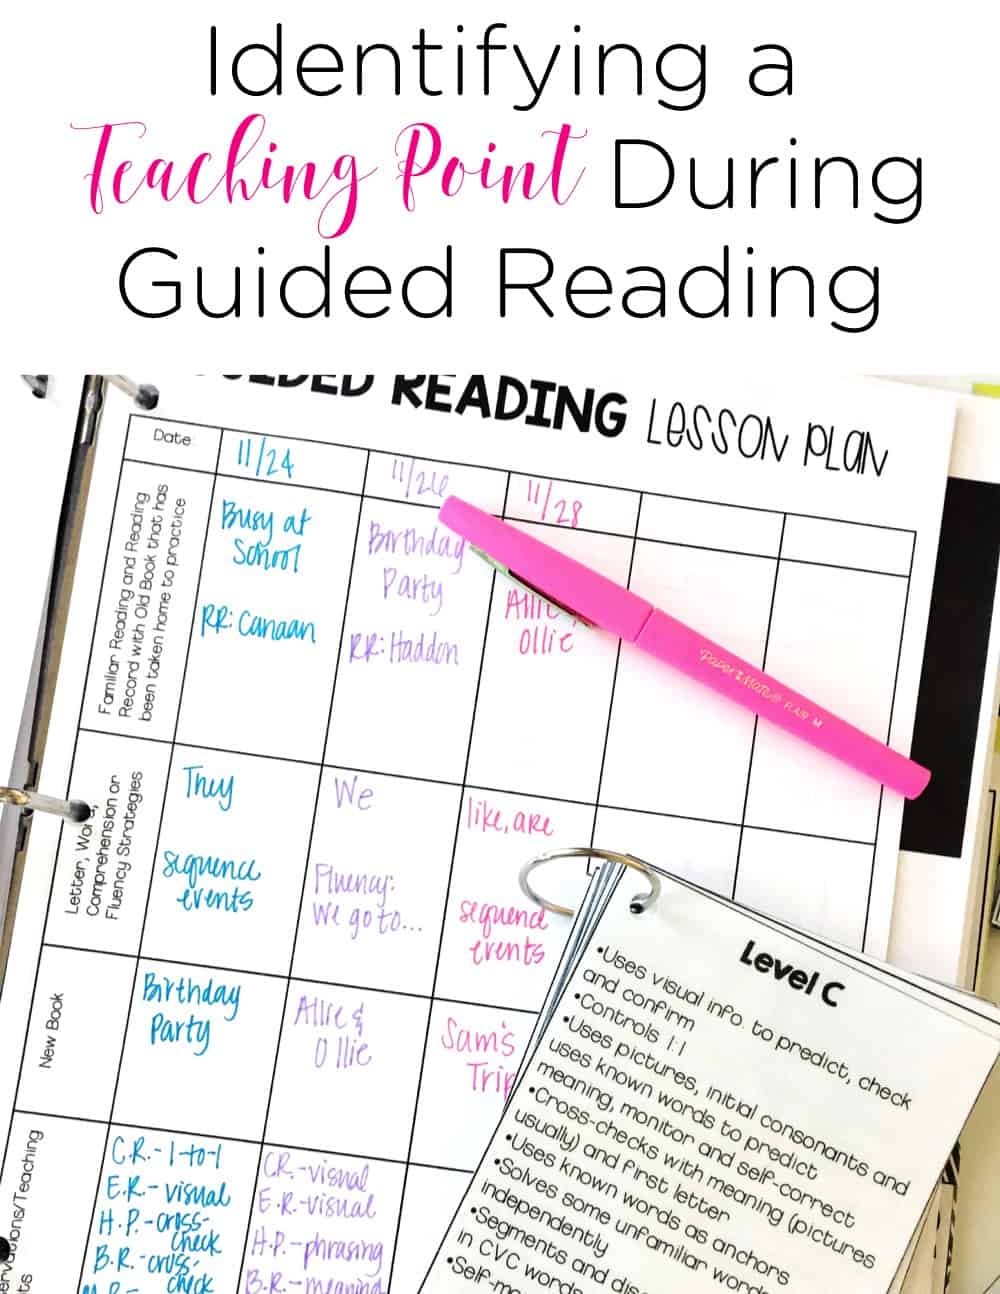 Identifying a Teaching Point During Guided Reading - Mrs